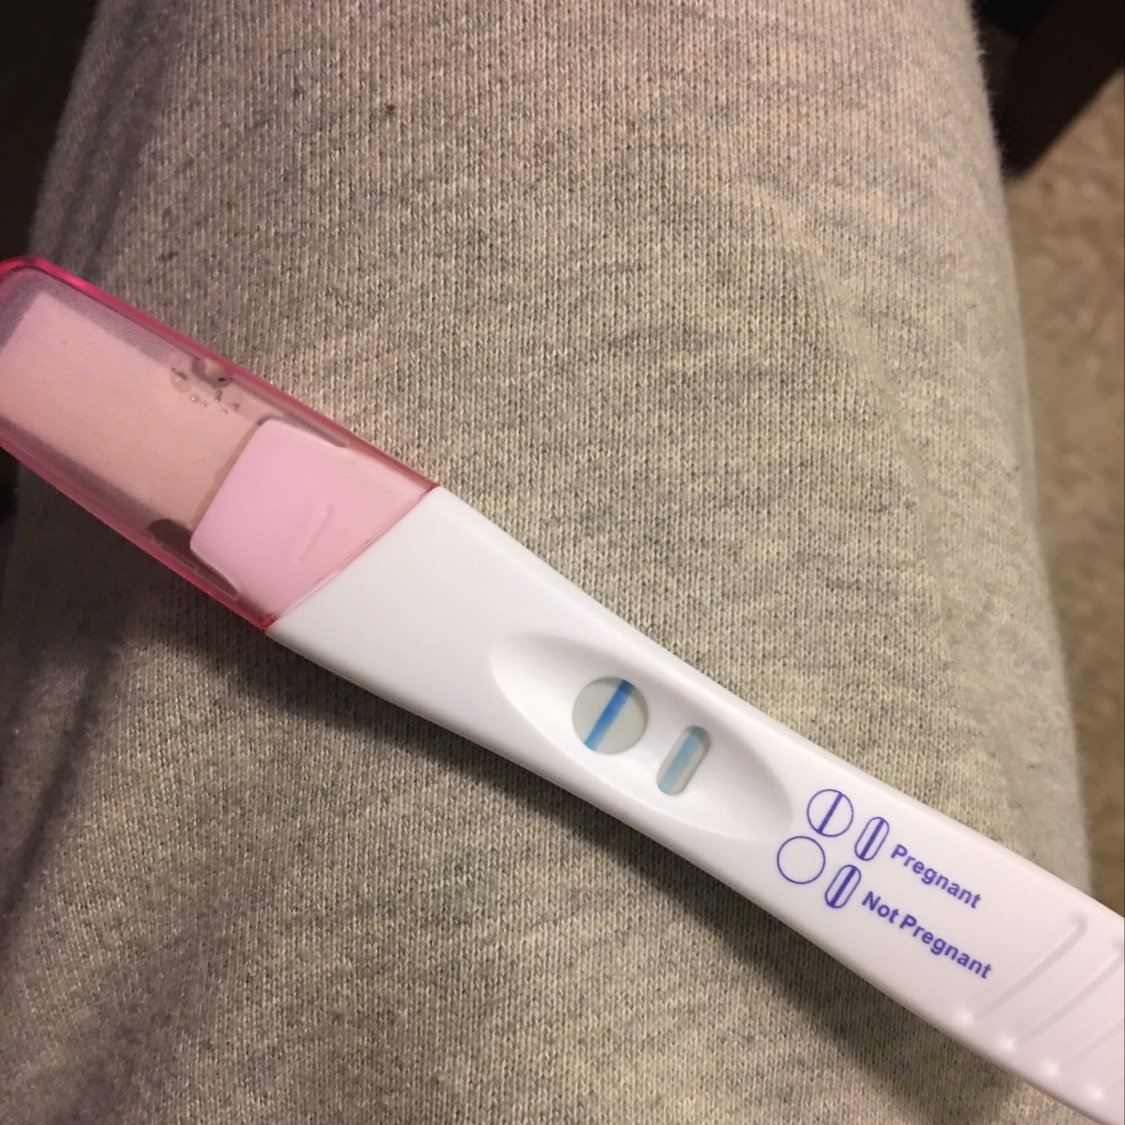 BFP??!!!!! 9 days late on my period